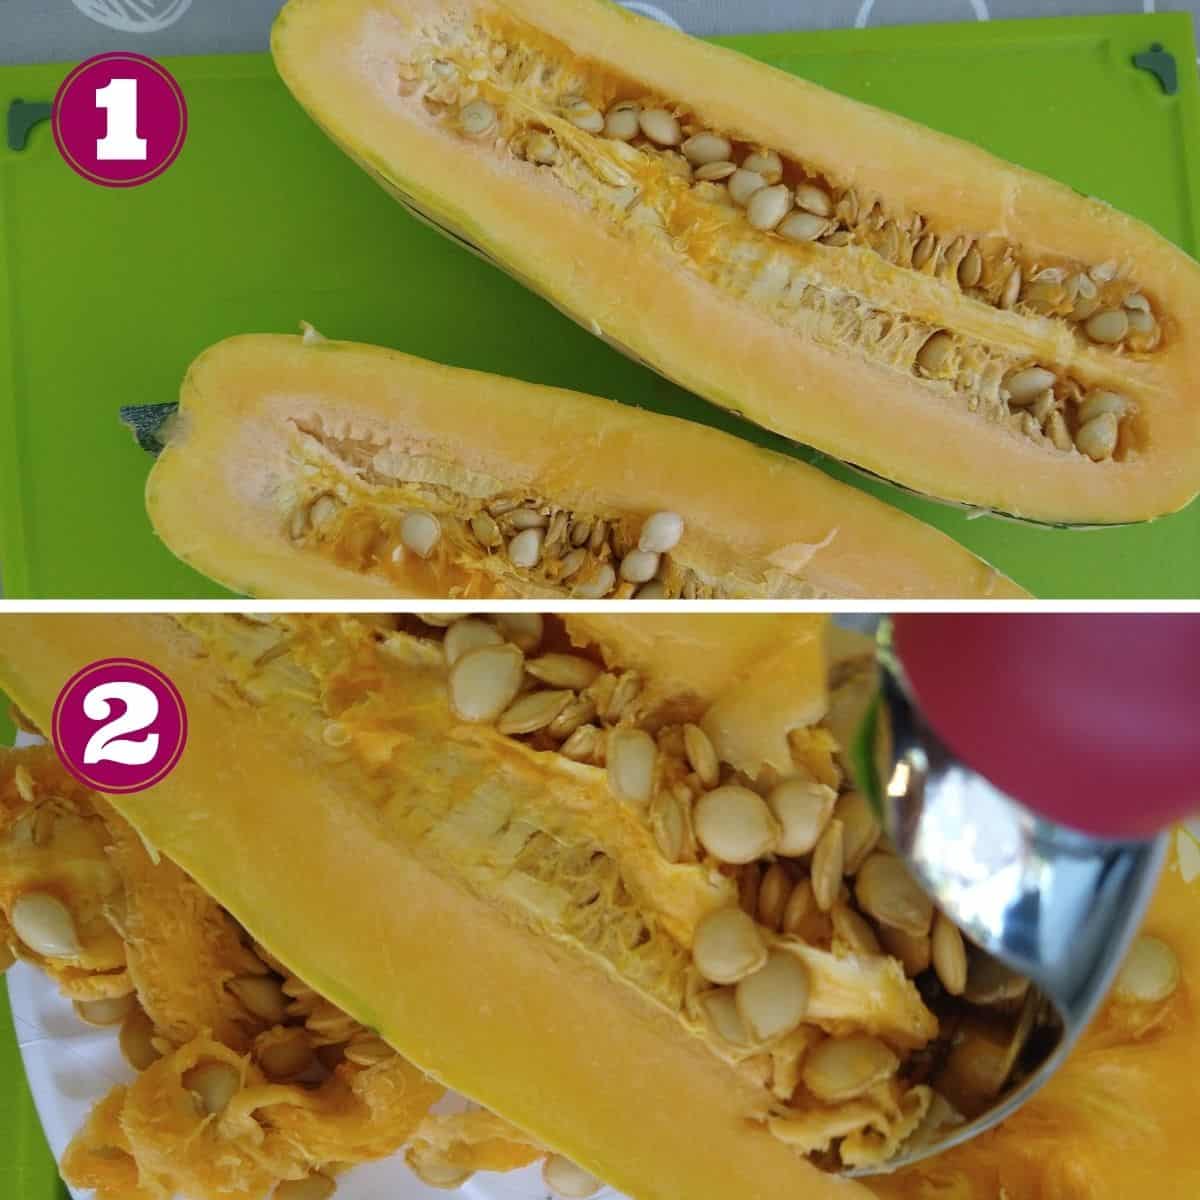 Step 1 of how to prepare the squash. Cut the squash in half length wise. 
Step 2 shows a red ice cream scoop removing the seeds from one half